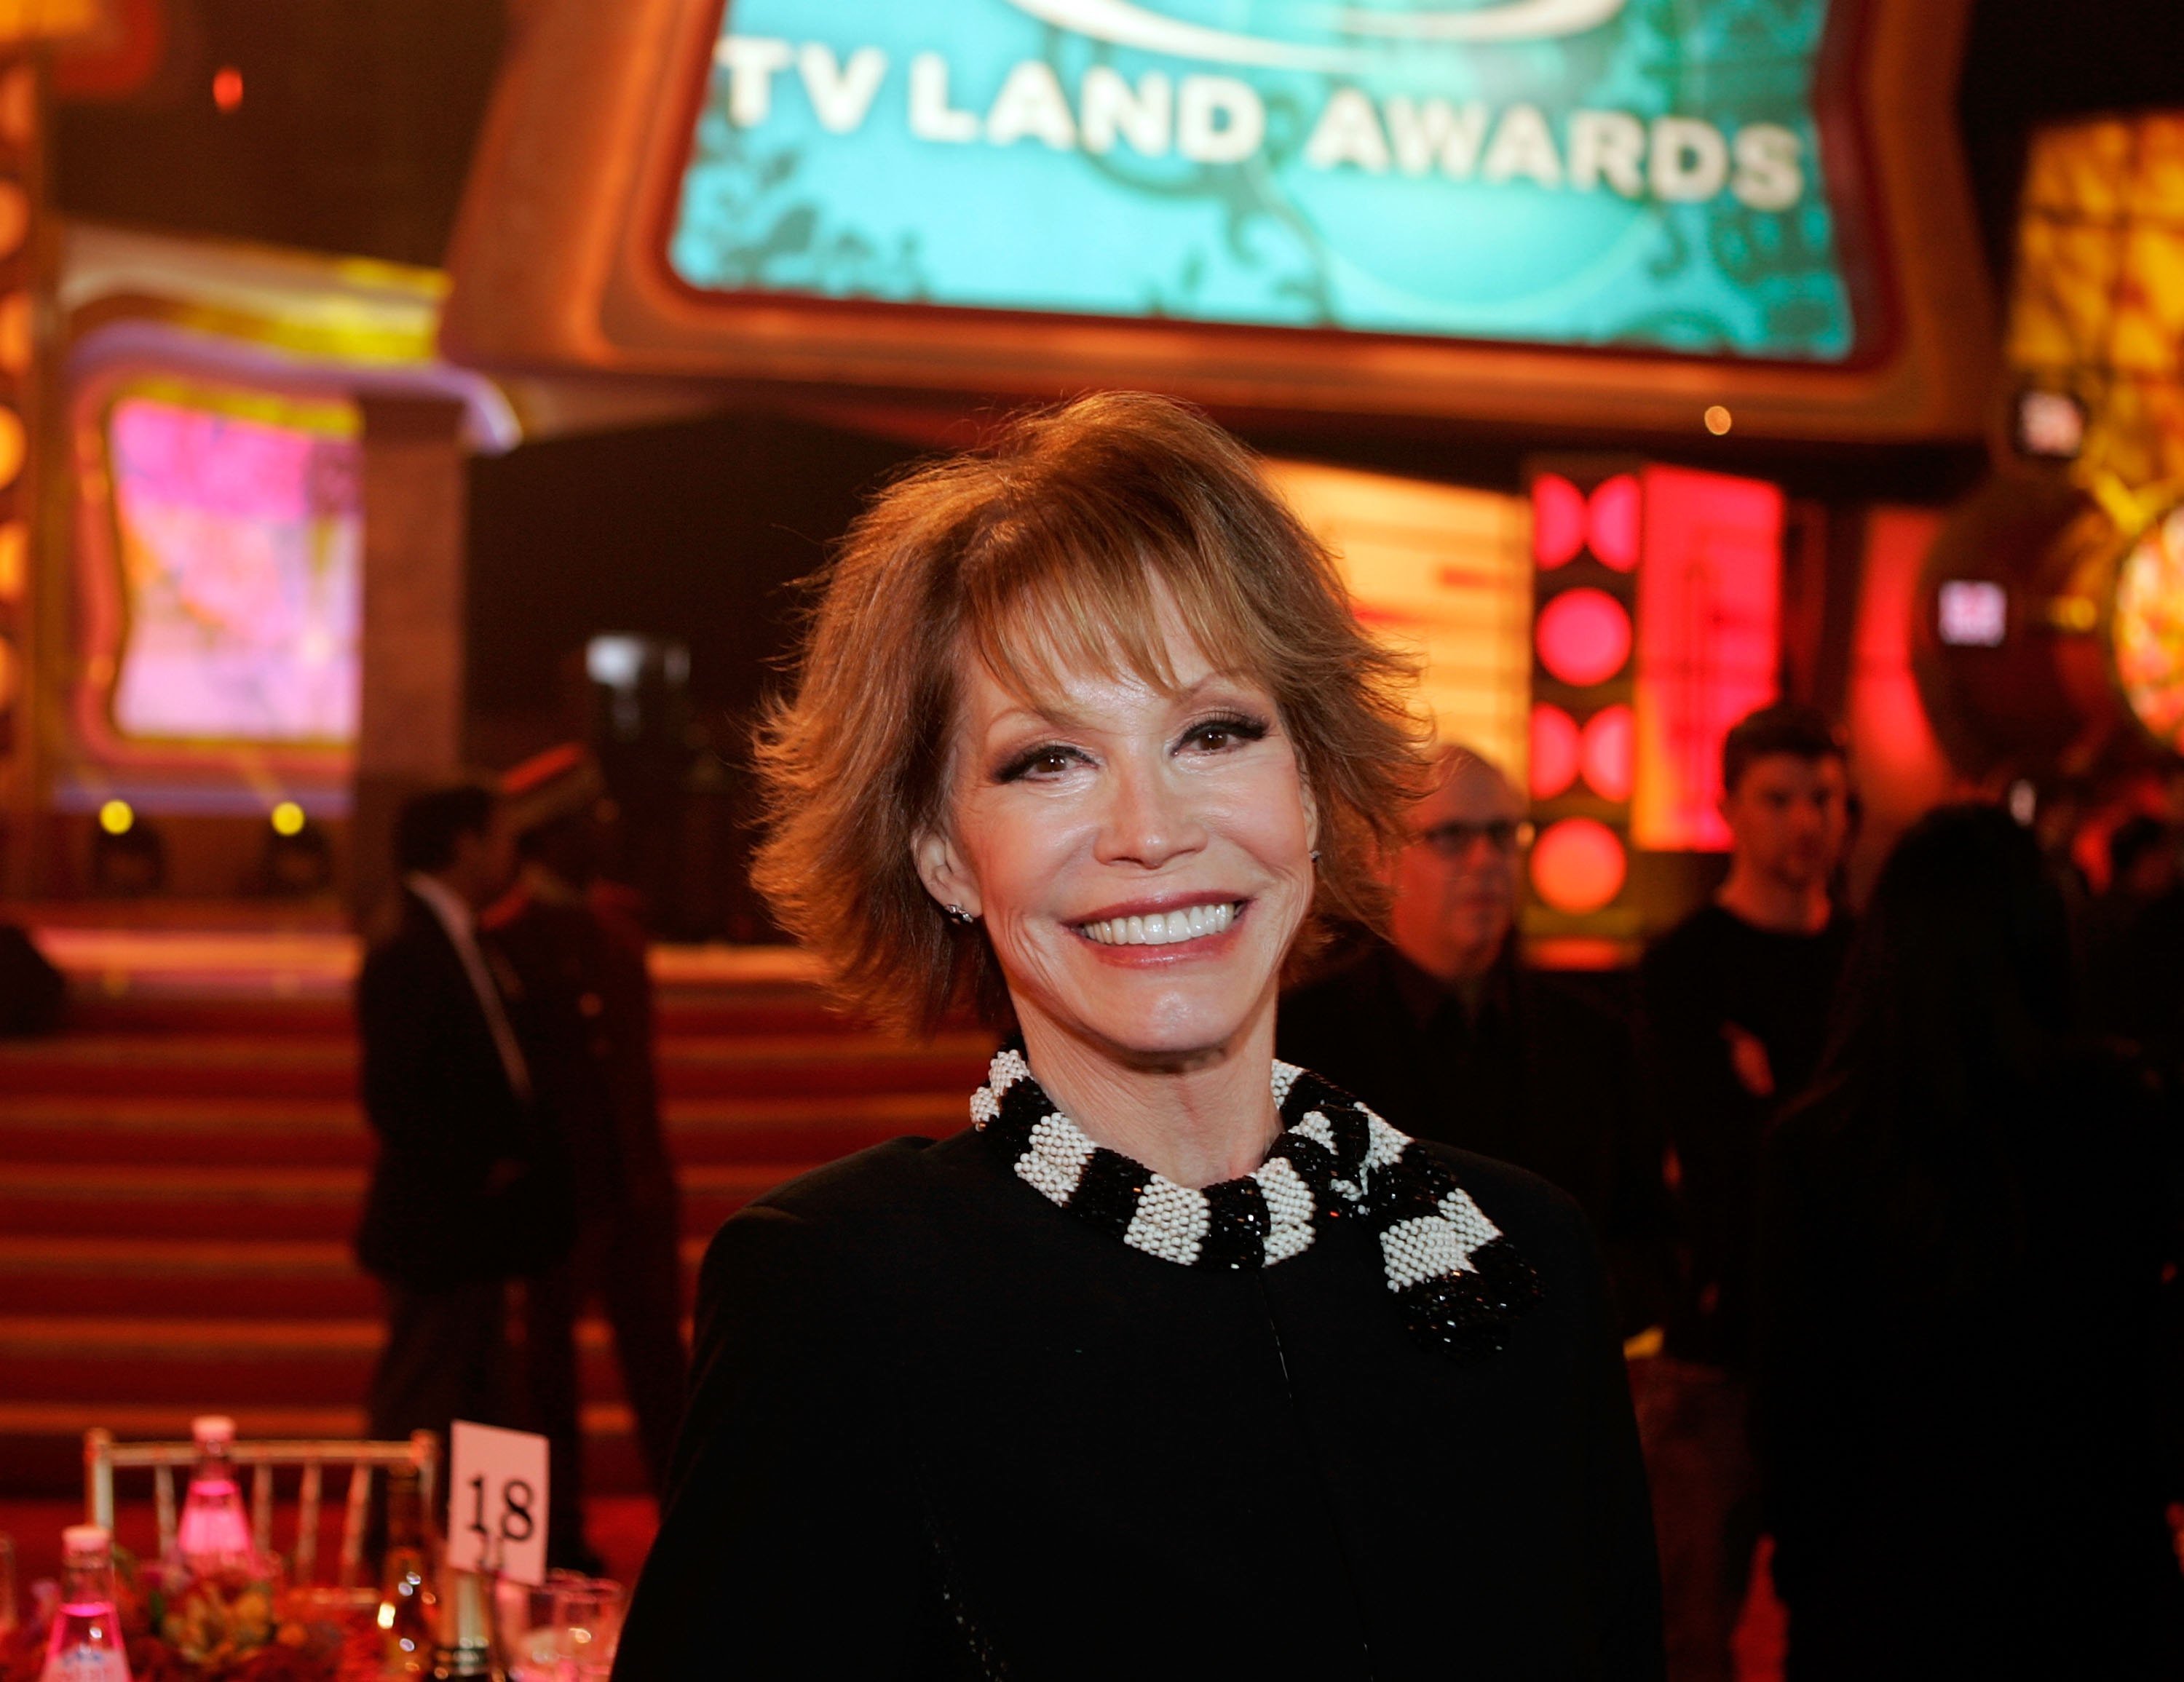 Mary Tyler Moore at the 2006 TV Land Awards on March 19, 2006 | Photo: GettyImages